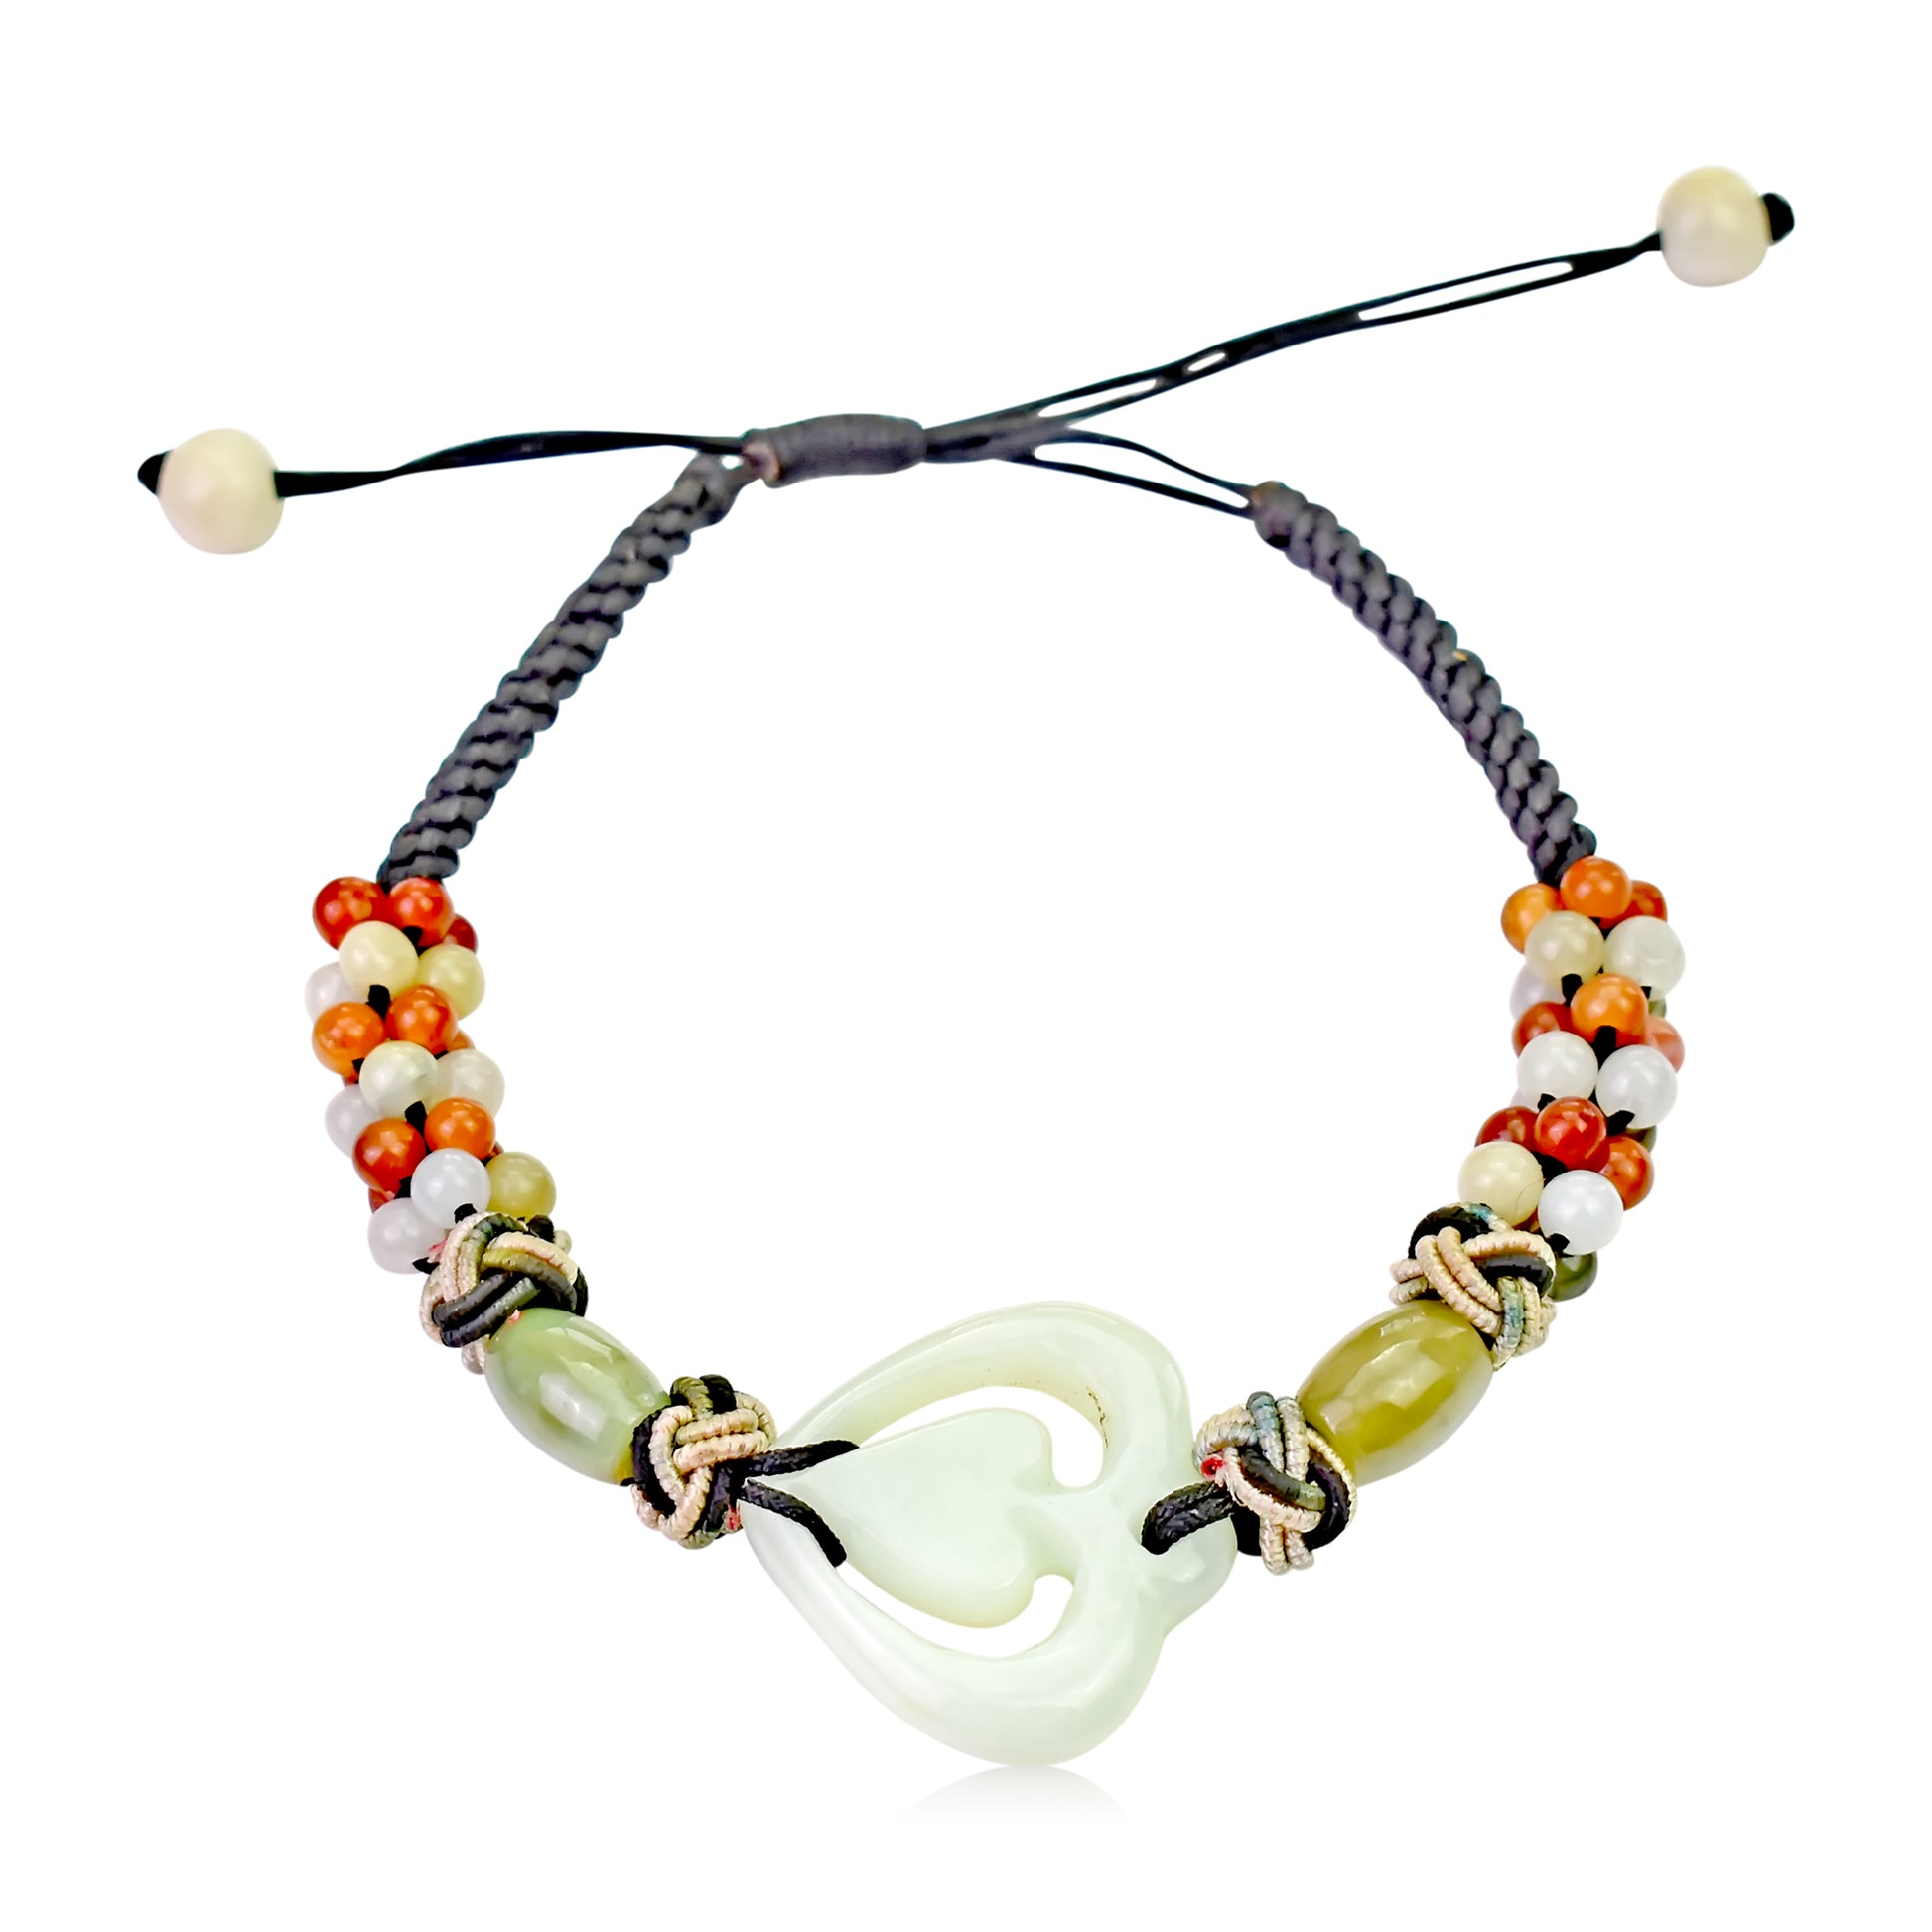 Spice up your Romance with this Heart Jade Handmade Jade Bracelet